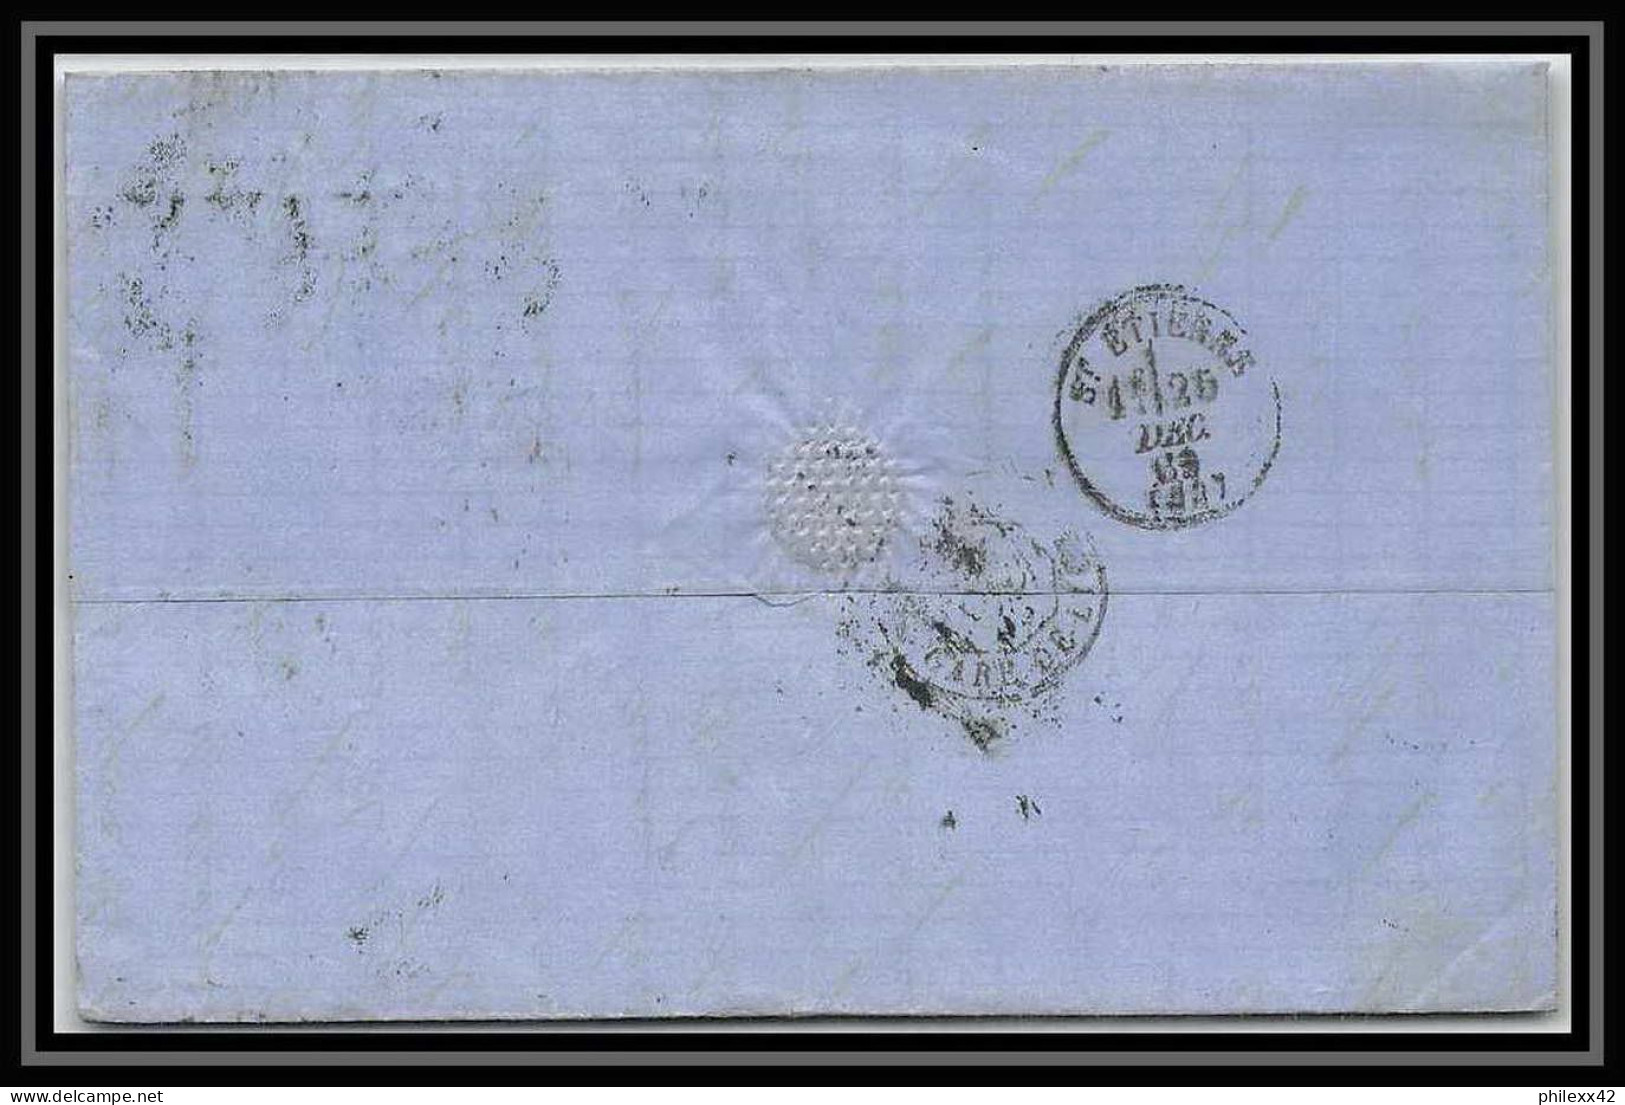 35727 N°32 Victoria 4p Red London St Etienne France 1869 Cachet 75 Lettre Cover Grande Bretagne England - Covers & Documents